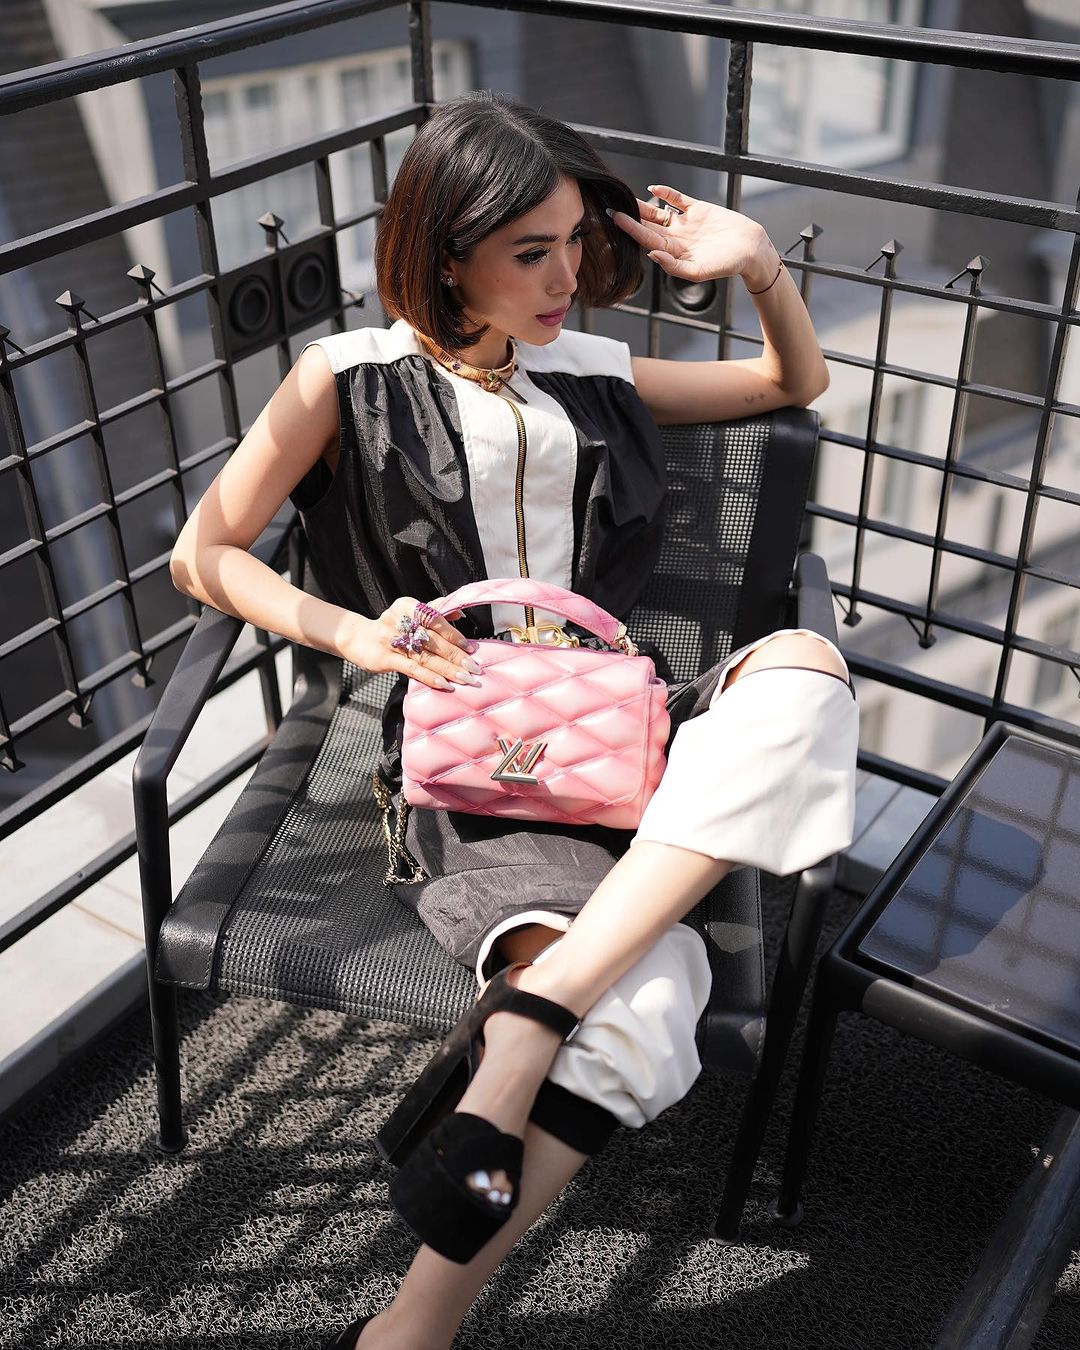 Heart Evangelista And More Celebrities Spotted Wearing The Louis Vuitton Go- 14 Bag